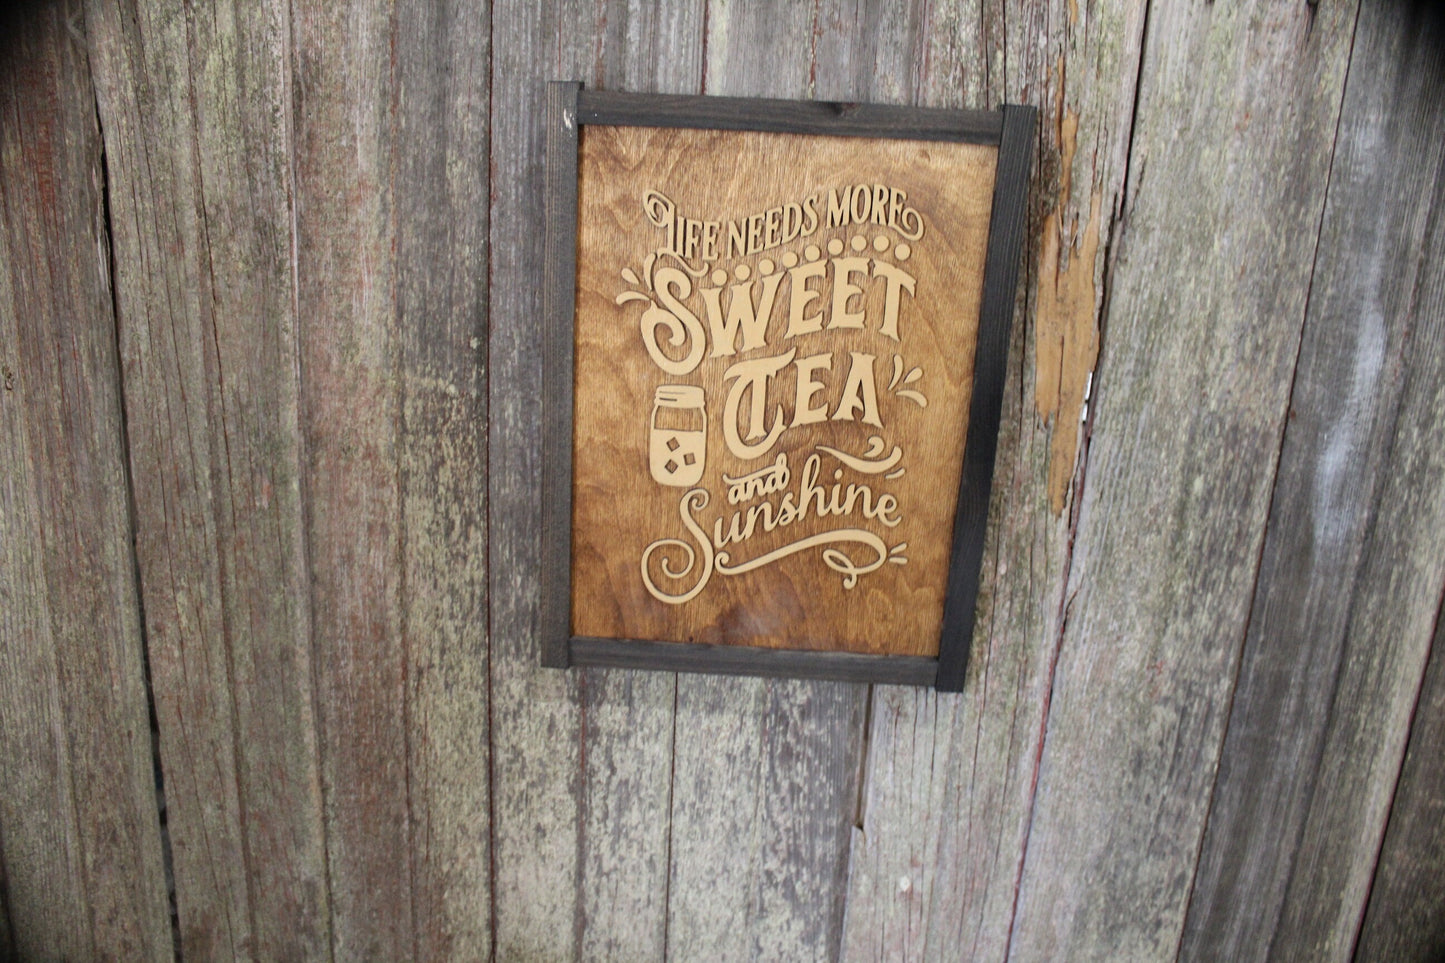 Sweet Tea Porch Sign Life Needs More Sunshine Porch Sitting Wood Sign 3D Raised Text Country Farmhouse Cabin Porch Decoration Relax